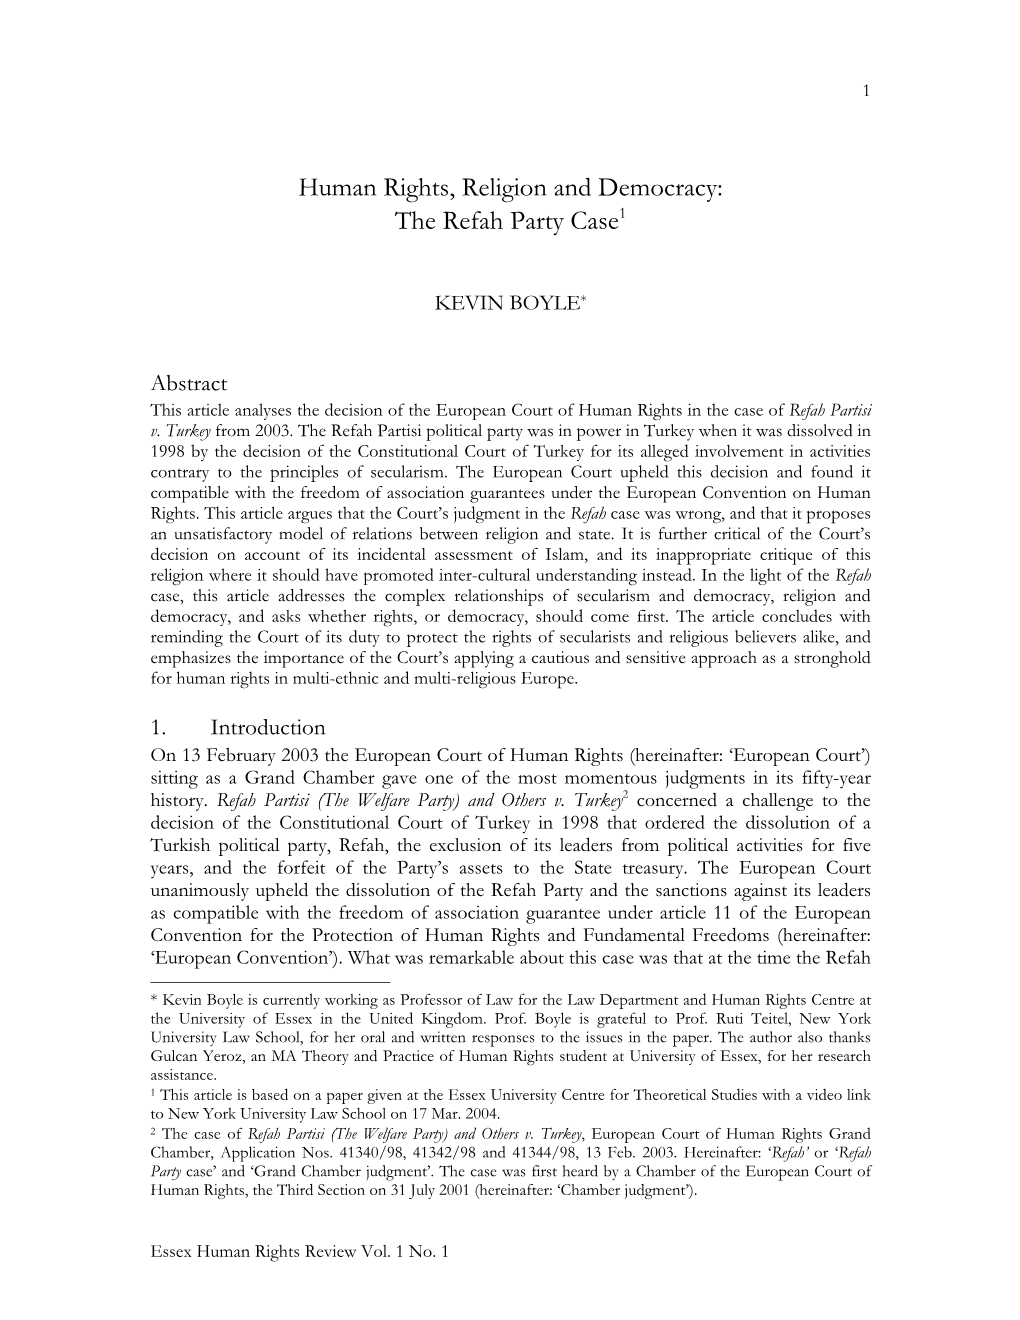 Human Rights, Religion and Democracy: the Refah Party Case1